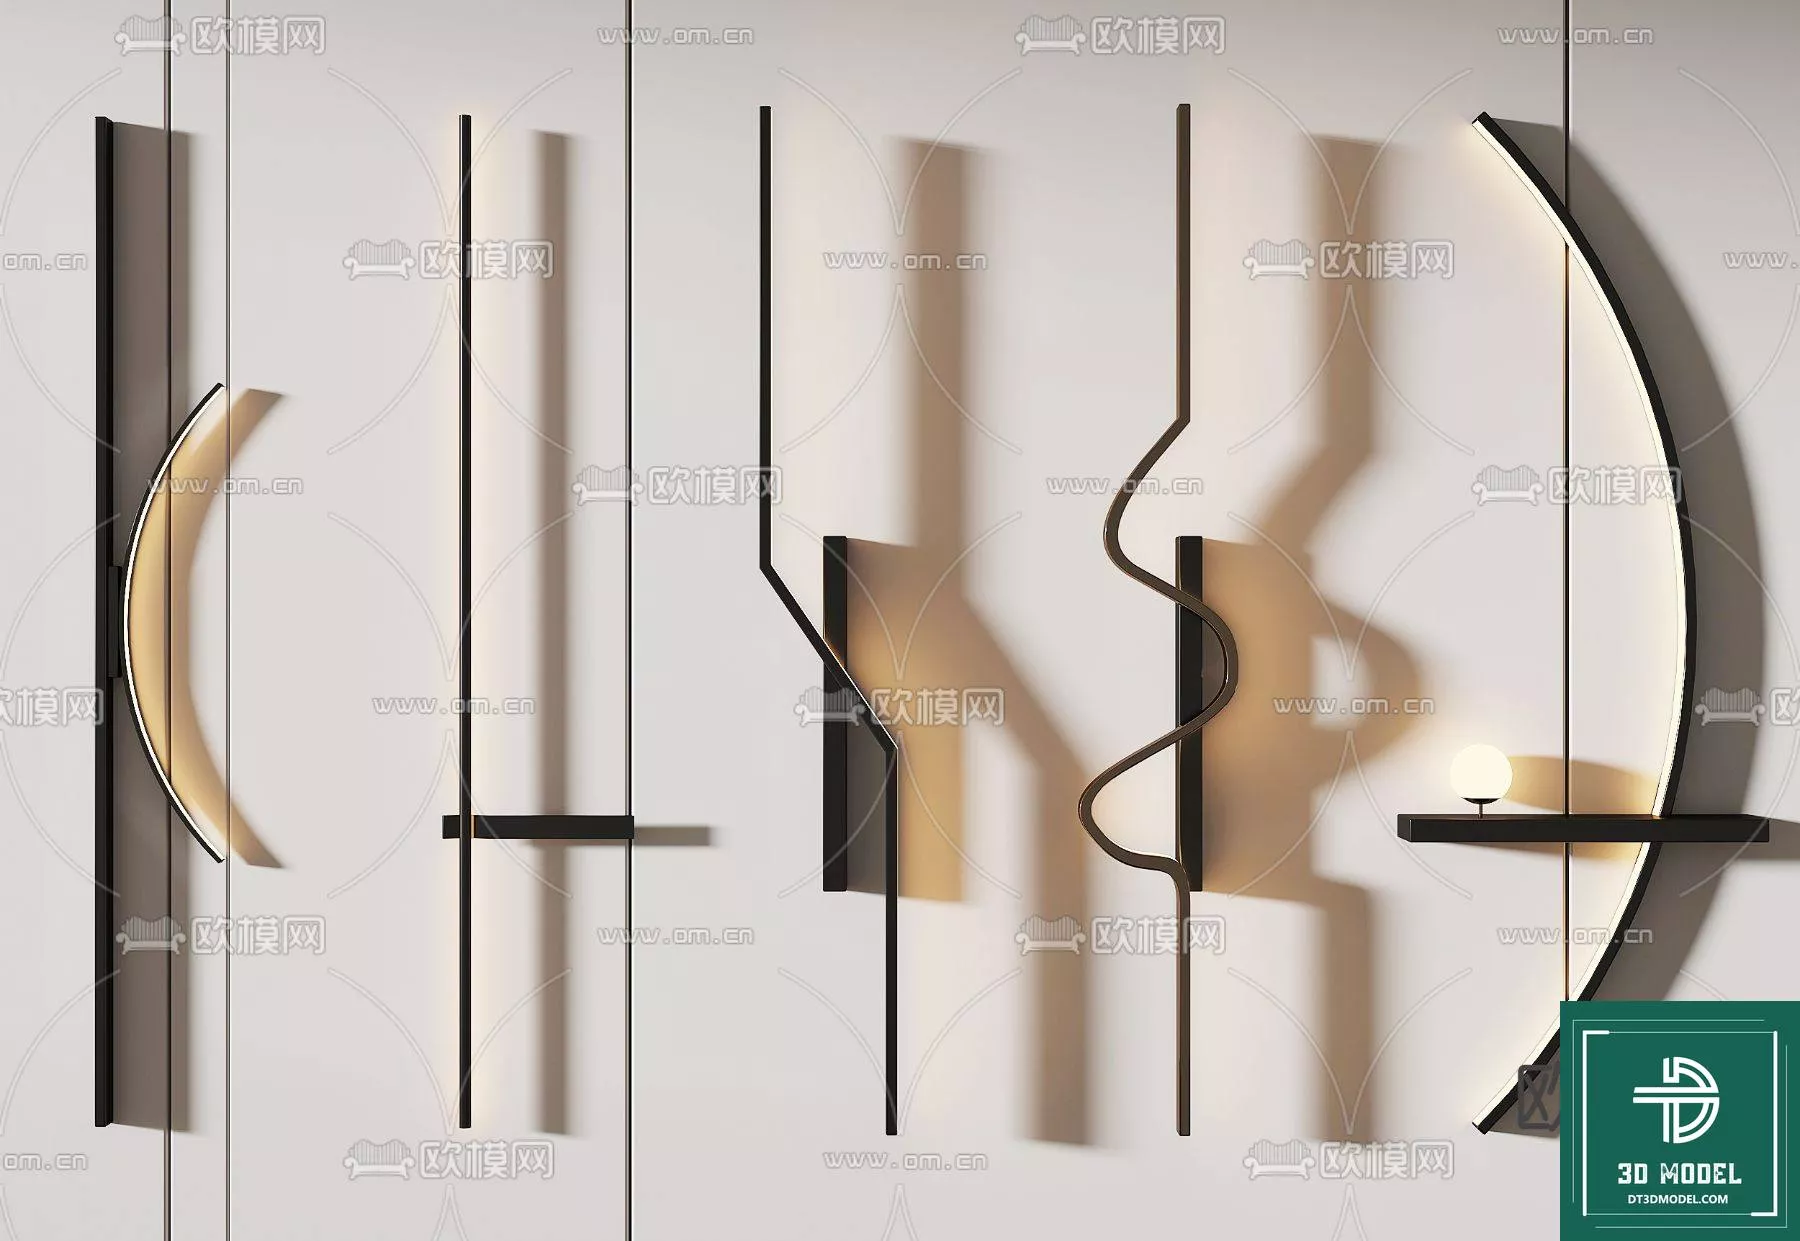 MODERN WALL LAMP - SKETCHUP 3D MODEL - VRAY OR ENSCAPE - ID16075